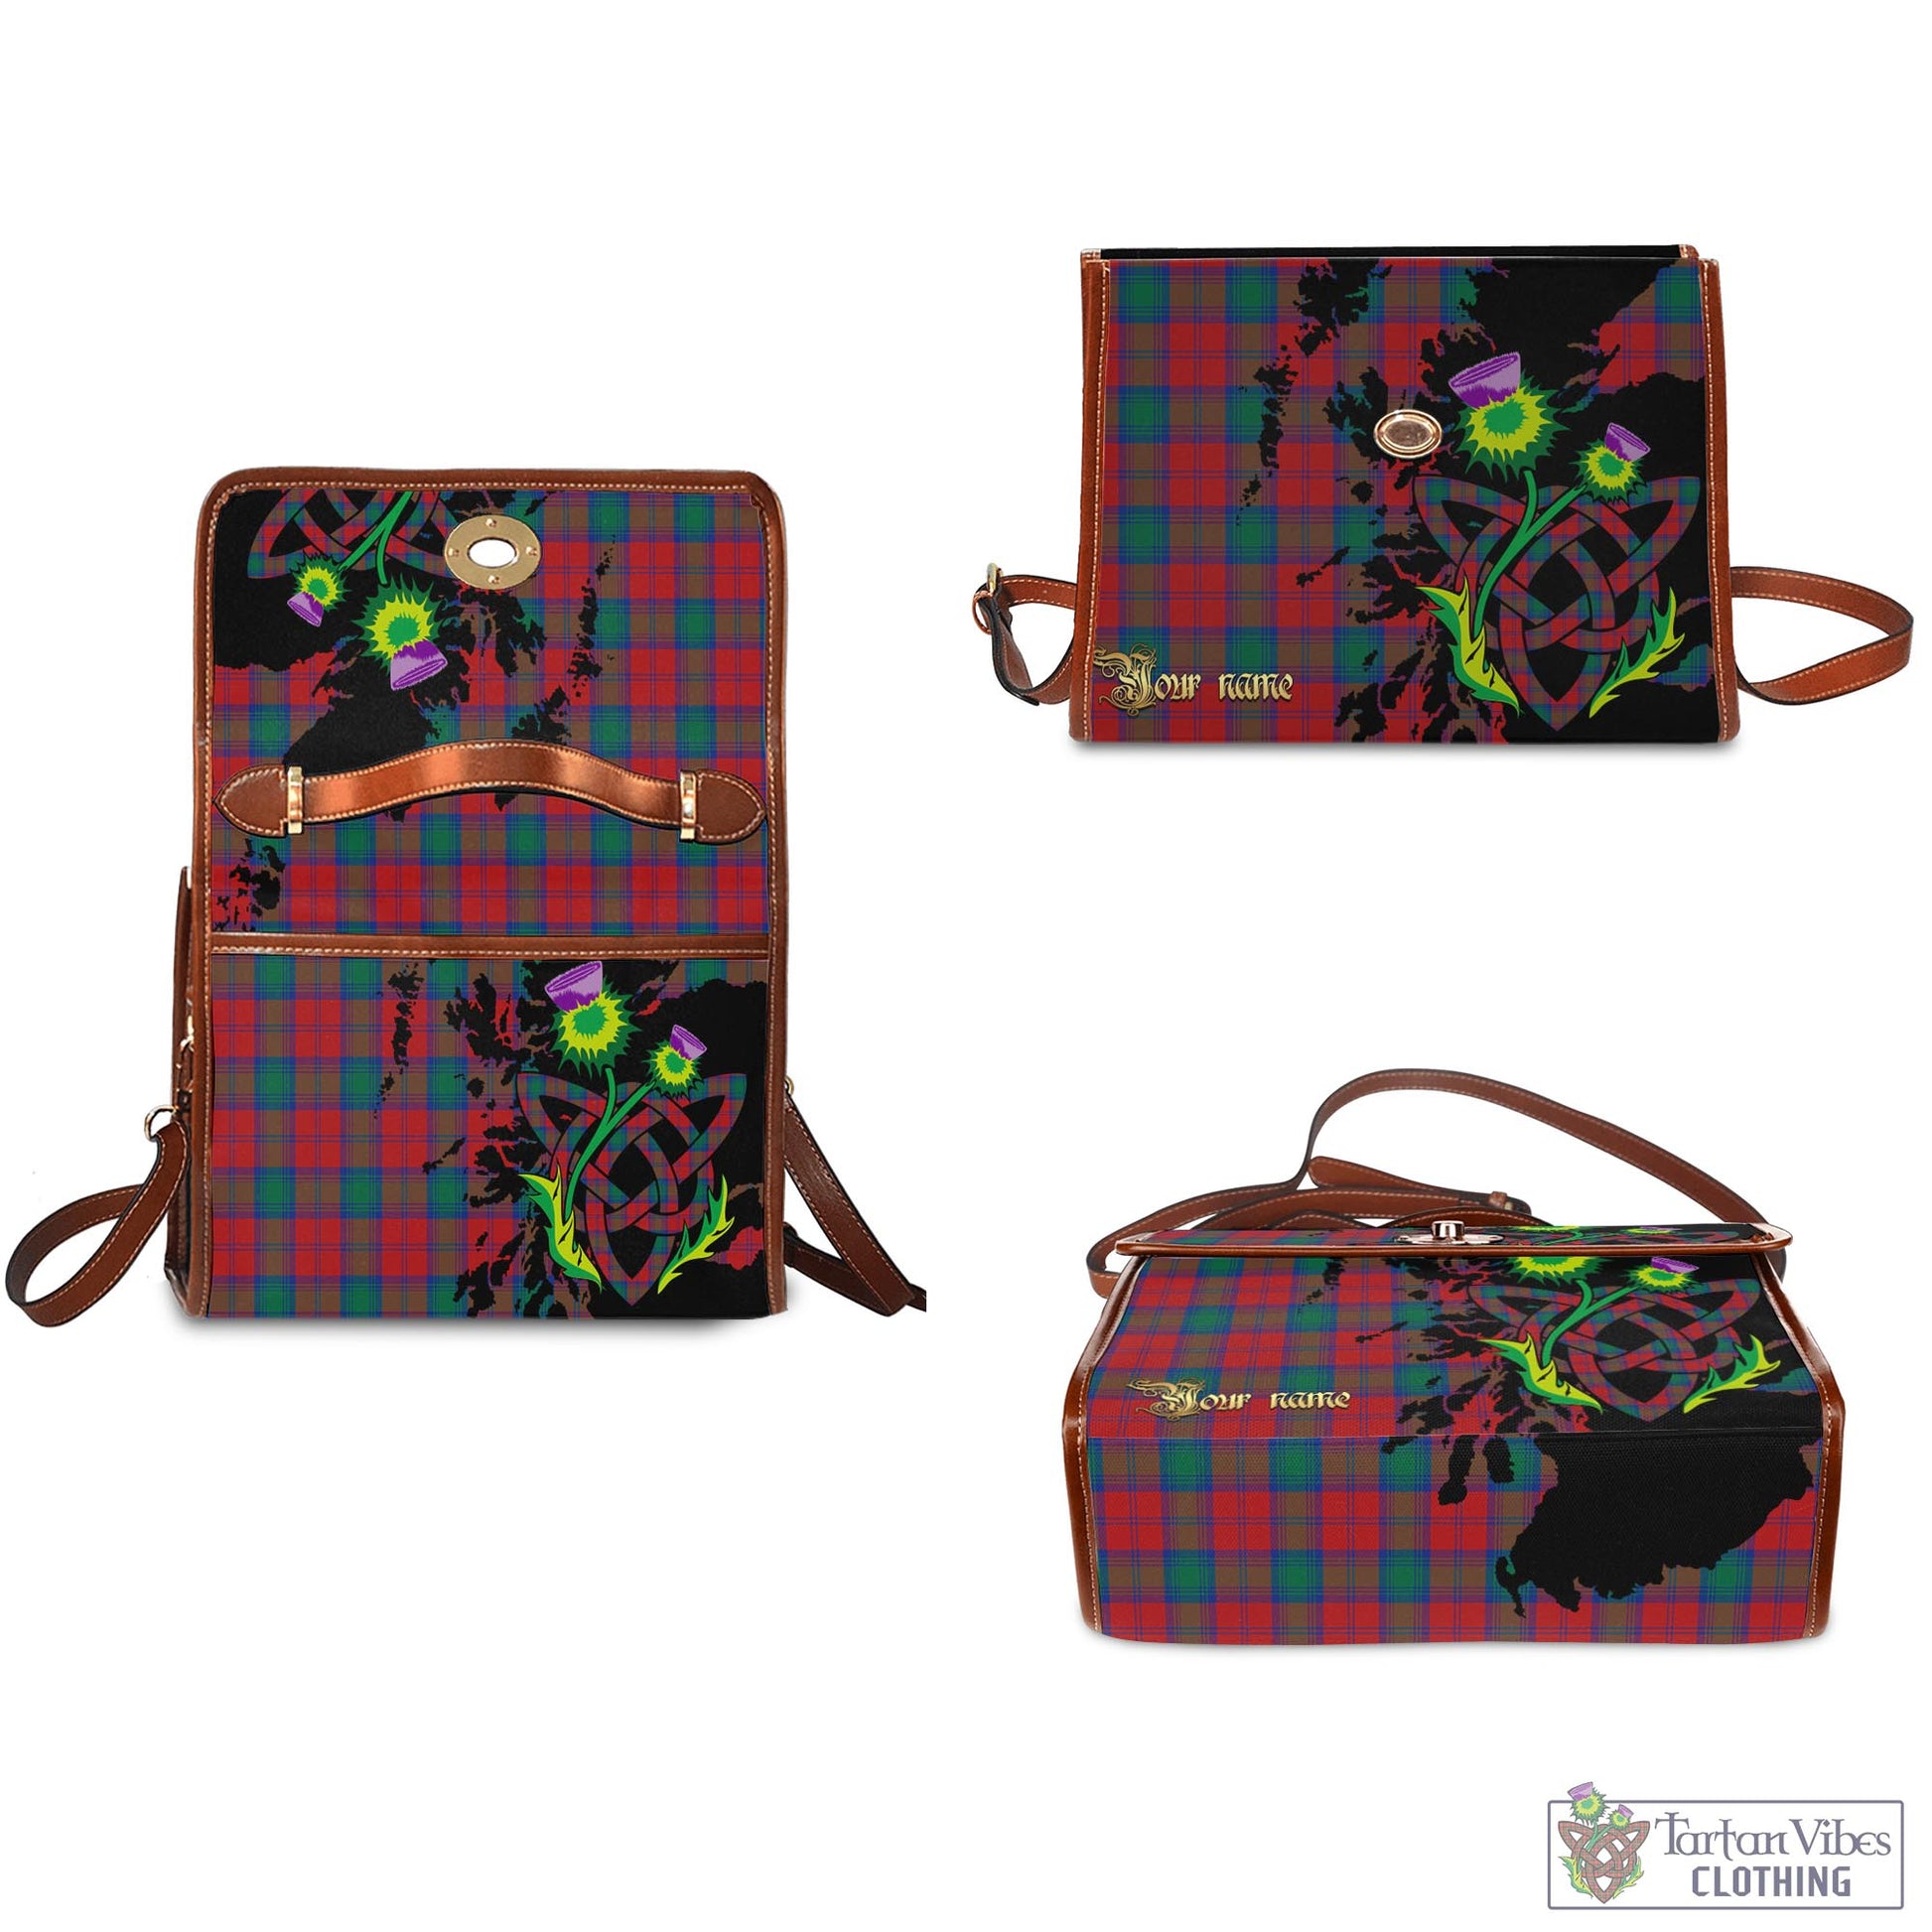 Tartan Vibes Clothing Fotheringham Modern Tartan Waterproof Canvas Bag with Scotland Map and Thistle Celtic Accents